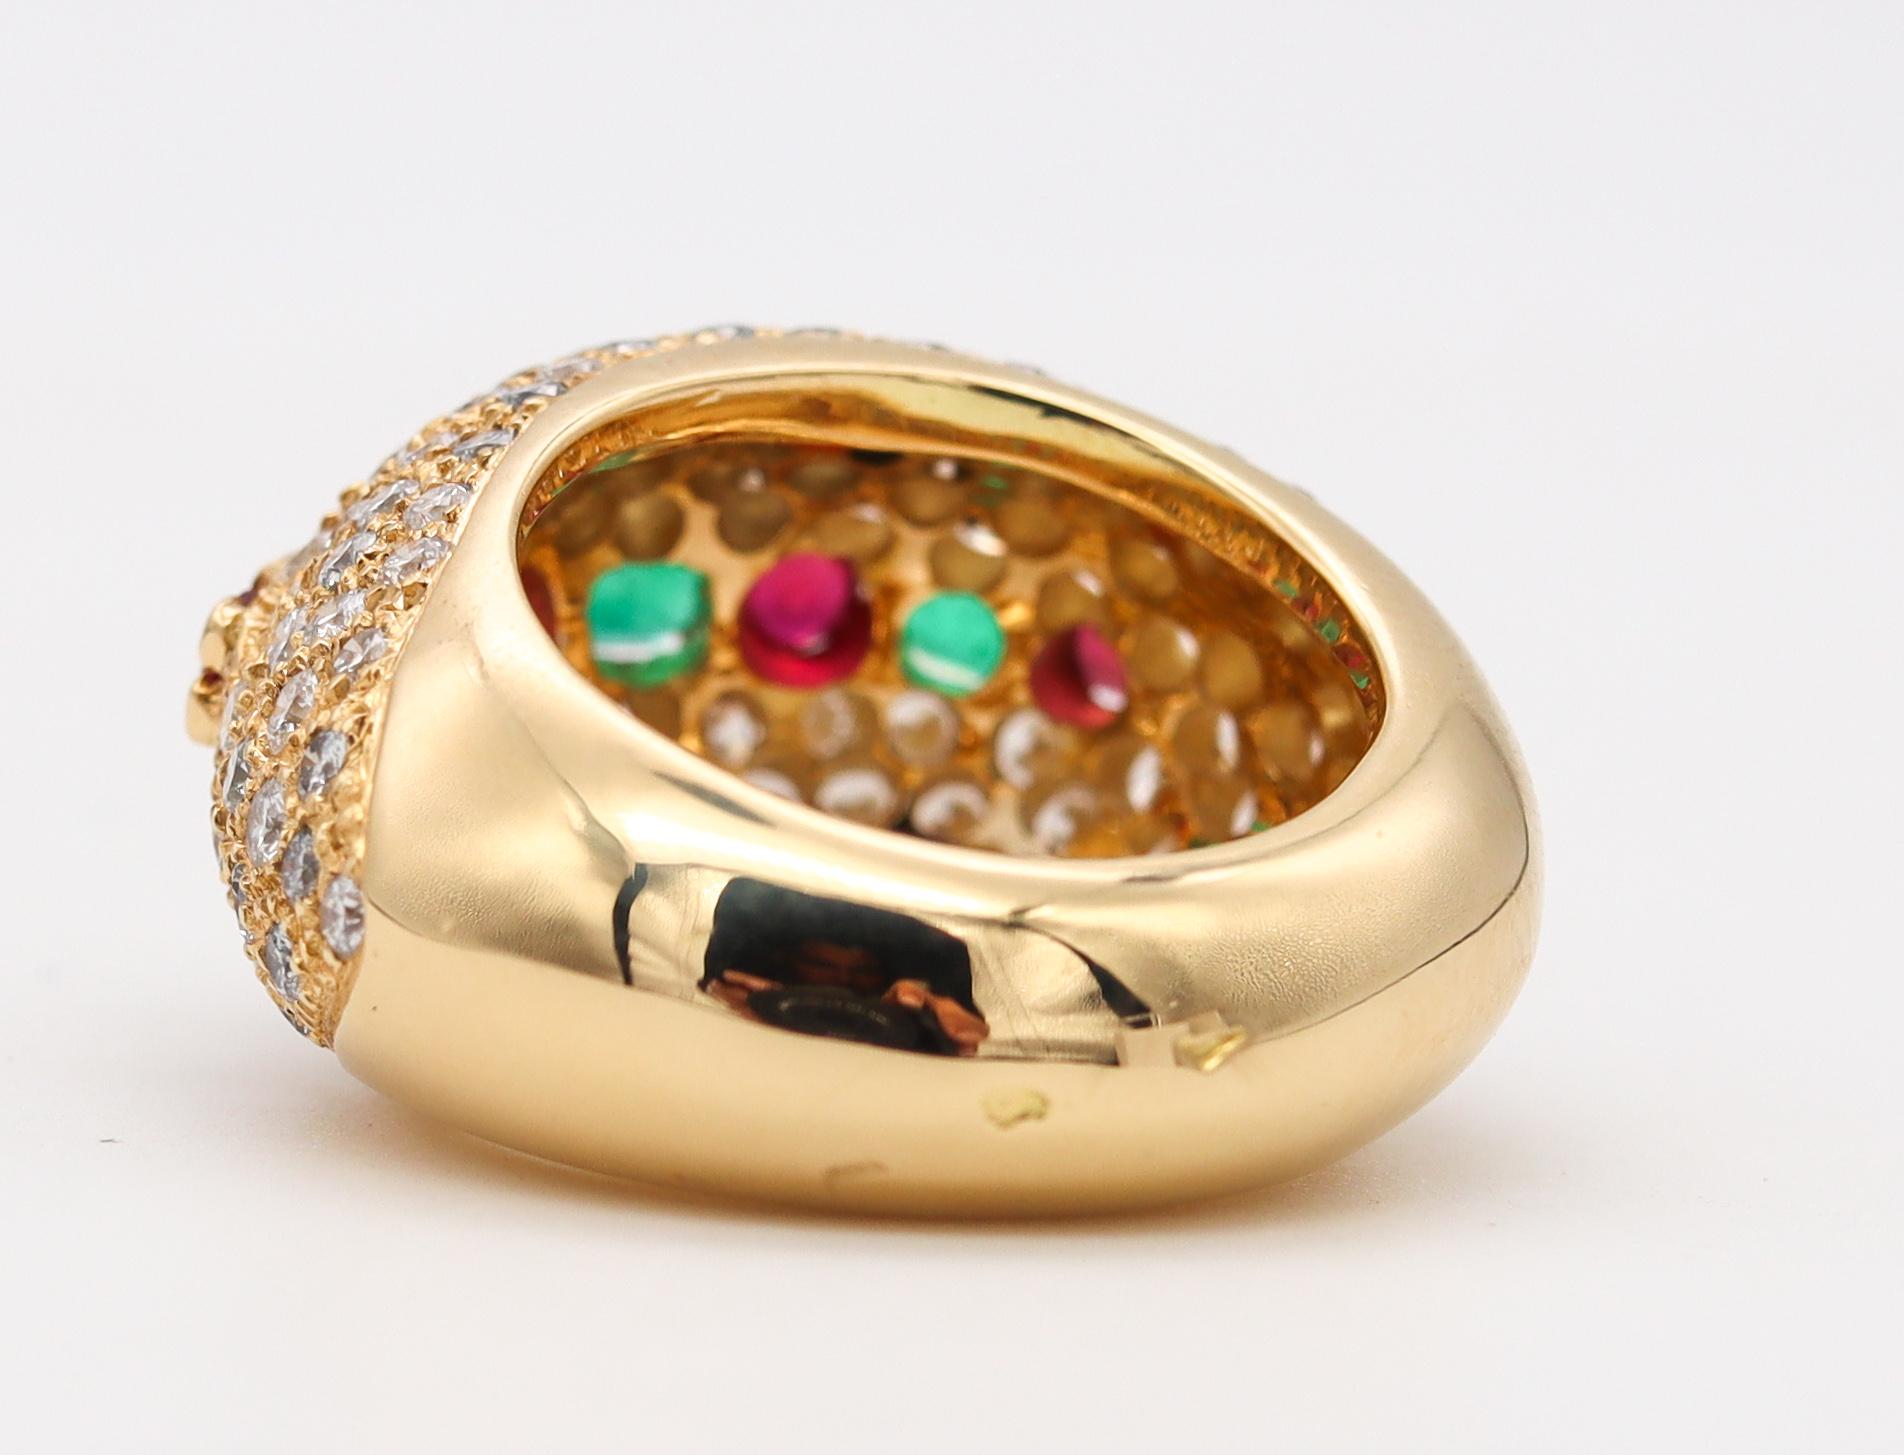 Women's French Modern Cocktail Ring in 18Kt Gold with 7.32 Cts Diamonds Emerald Rubies